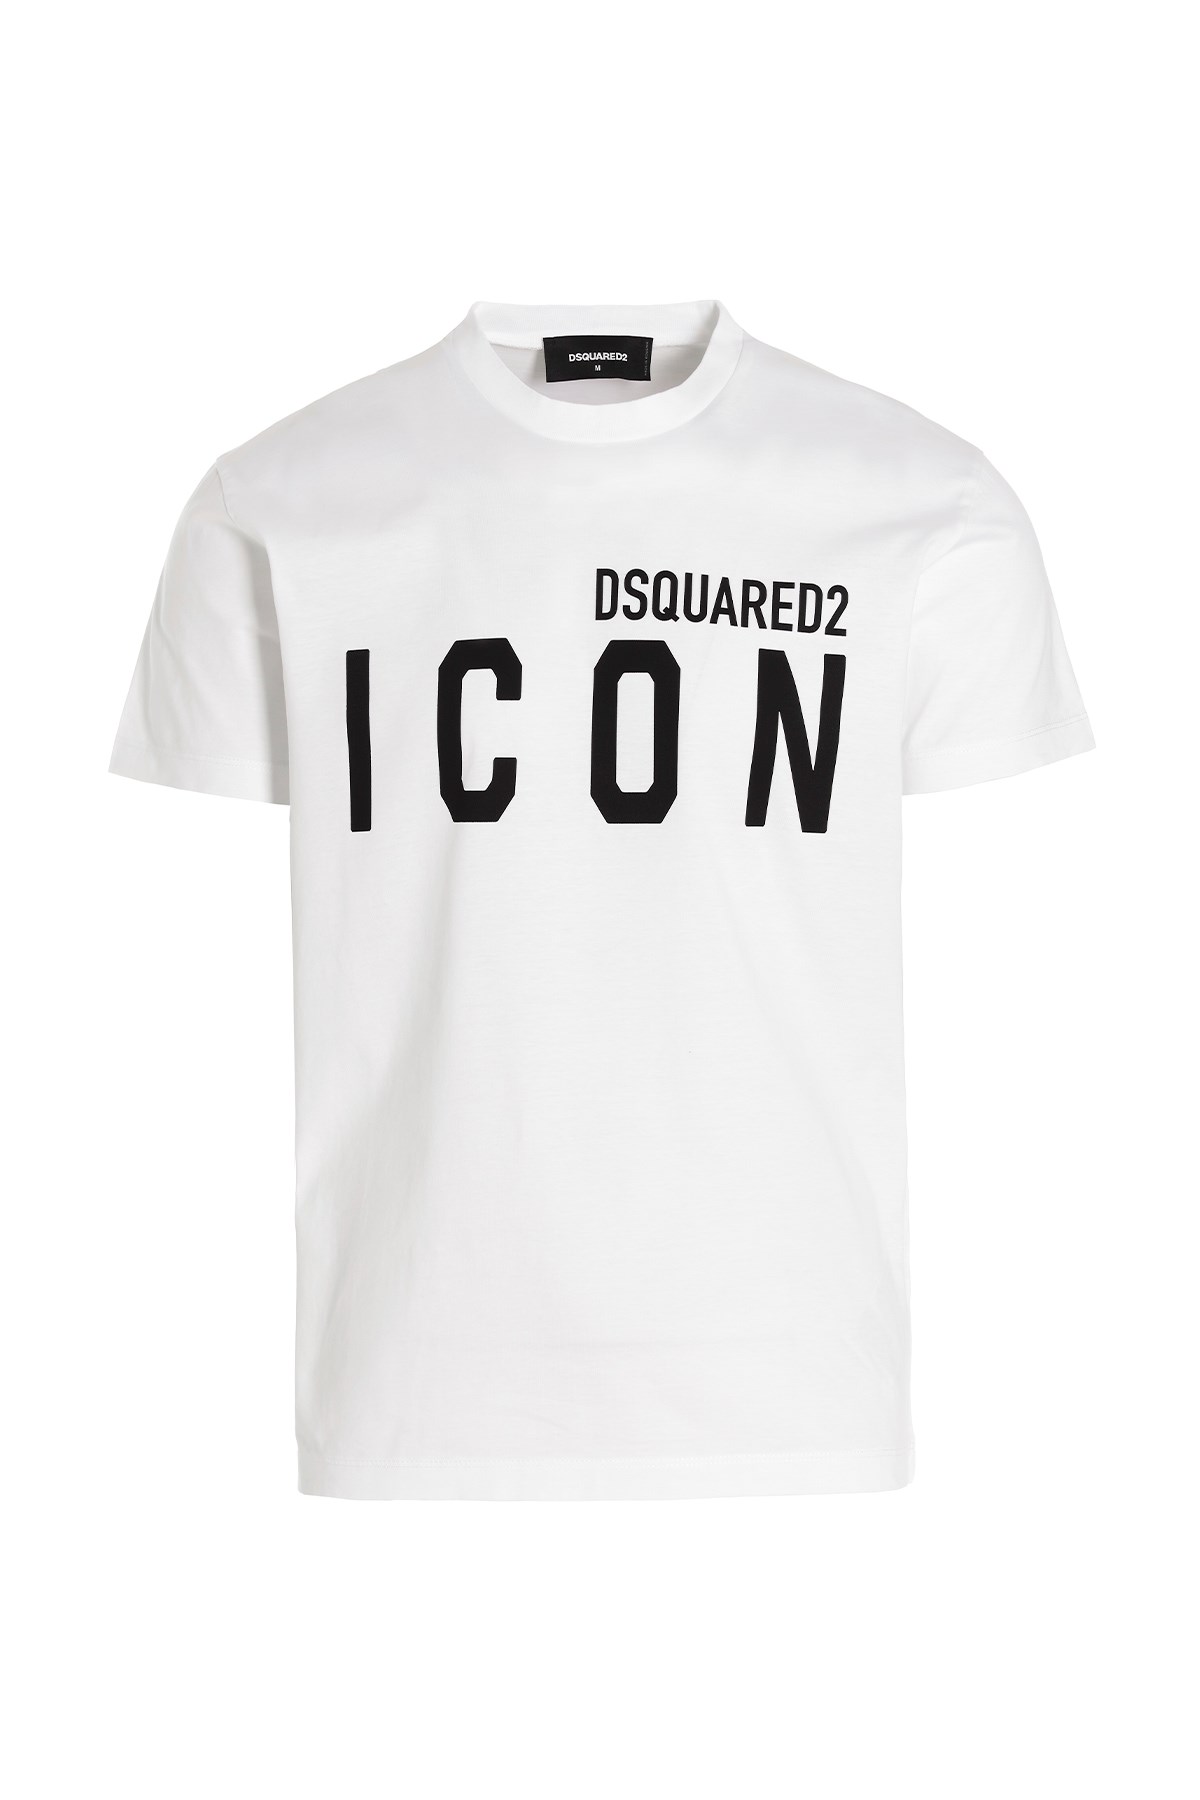 DSQUARED2 'Icon’ T-Shirt